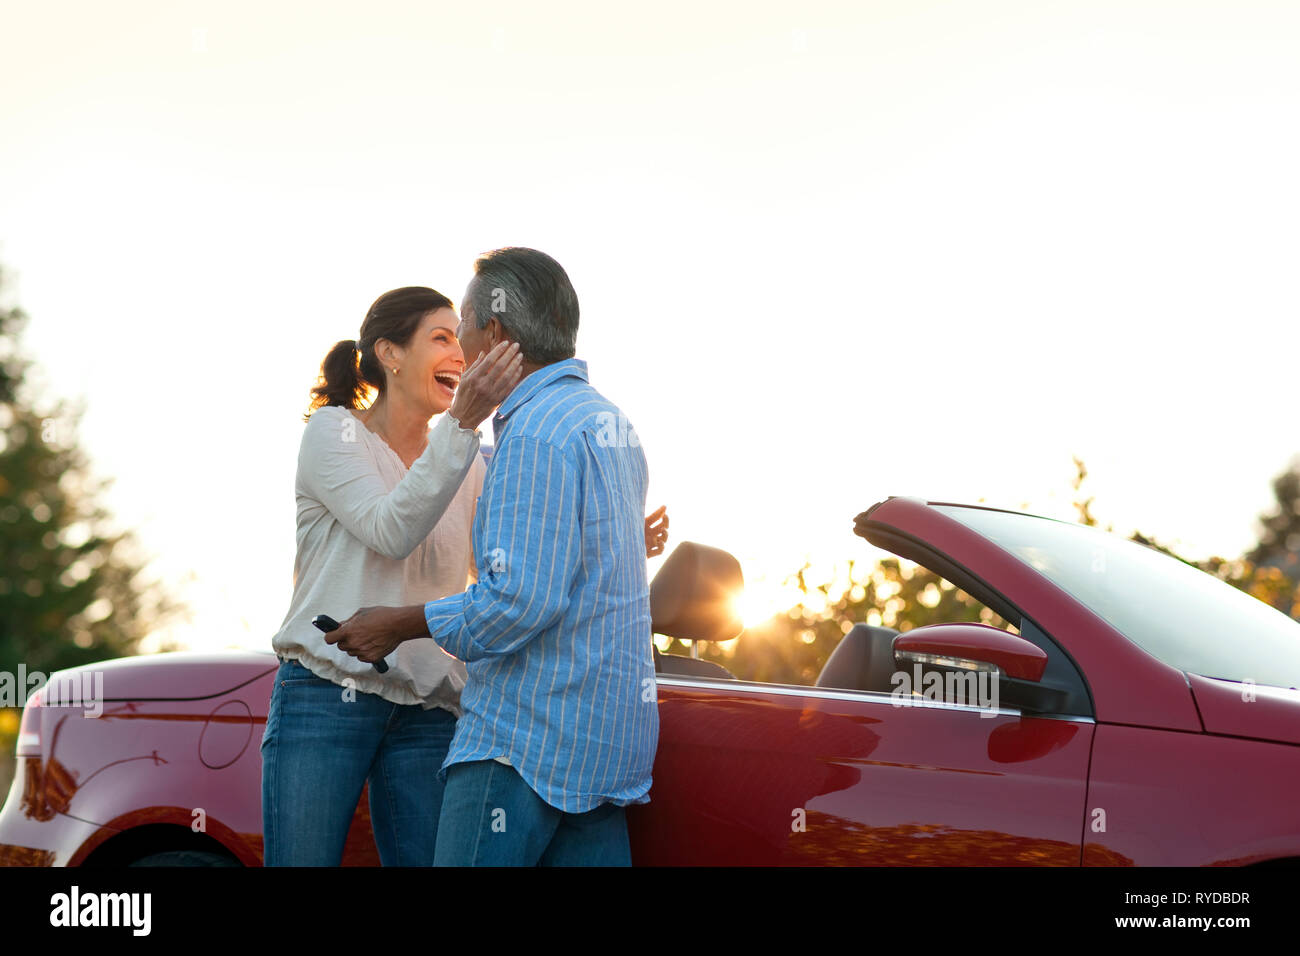 Mature couple hugging next to their car. Stock Photo